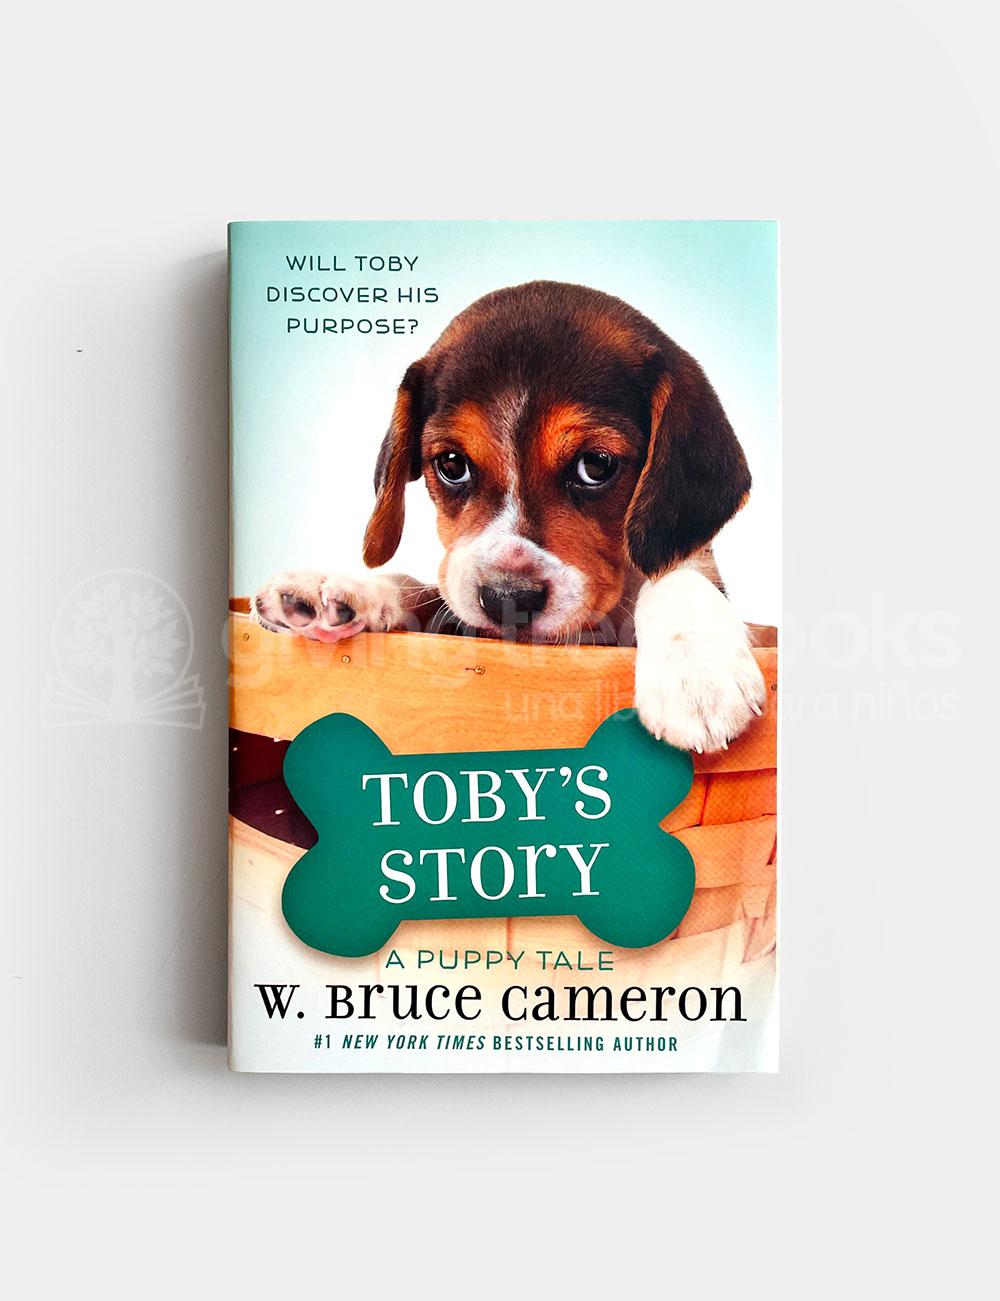 PUPPY TALE: TOBY'S STORY